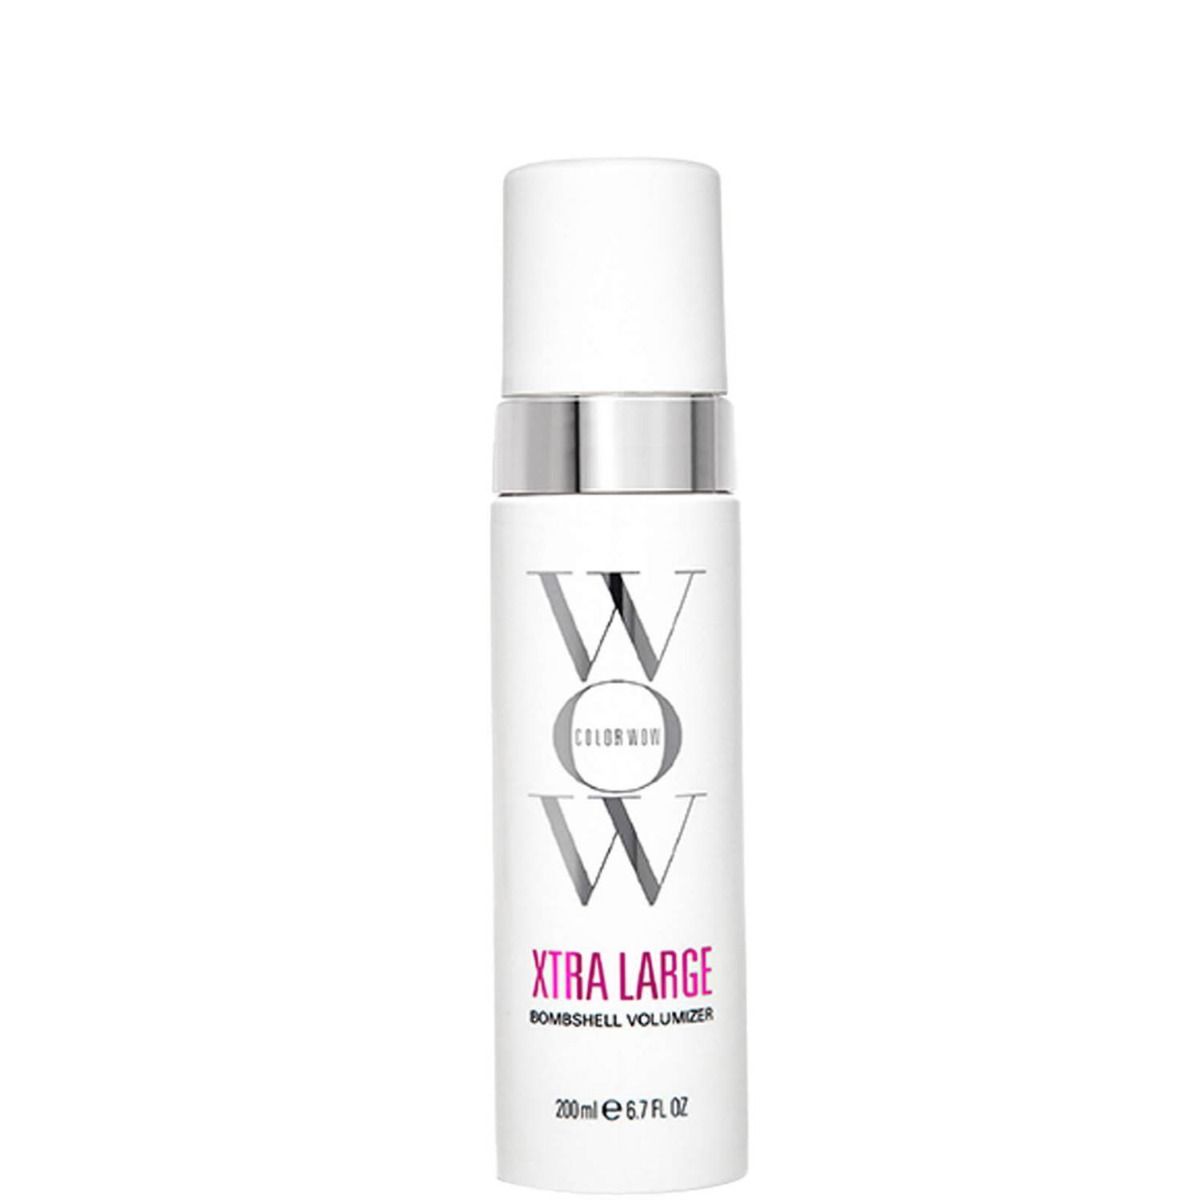 Color Wow Extra Large Bombshell Volumizer 200 ml